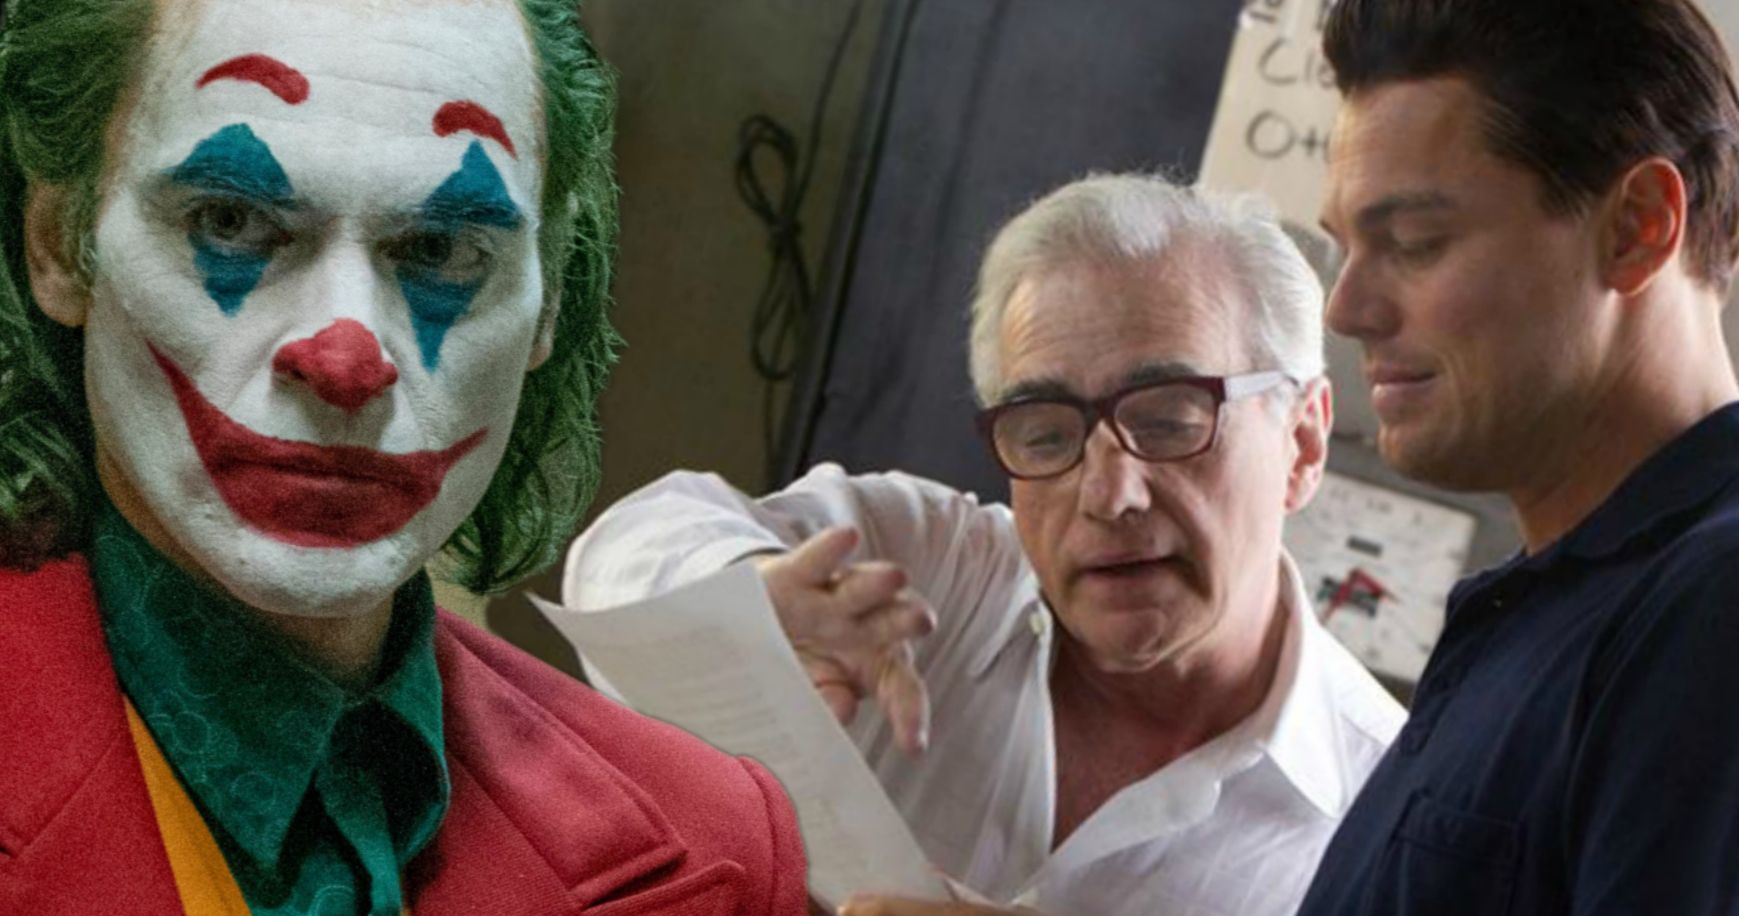 Joker Quietly Lost Martin Scorsese, So What Really Happened?